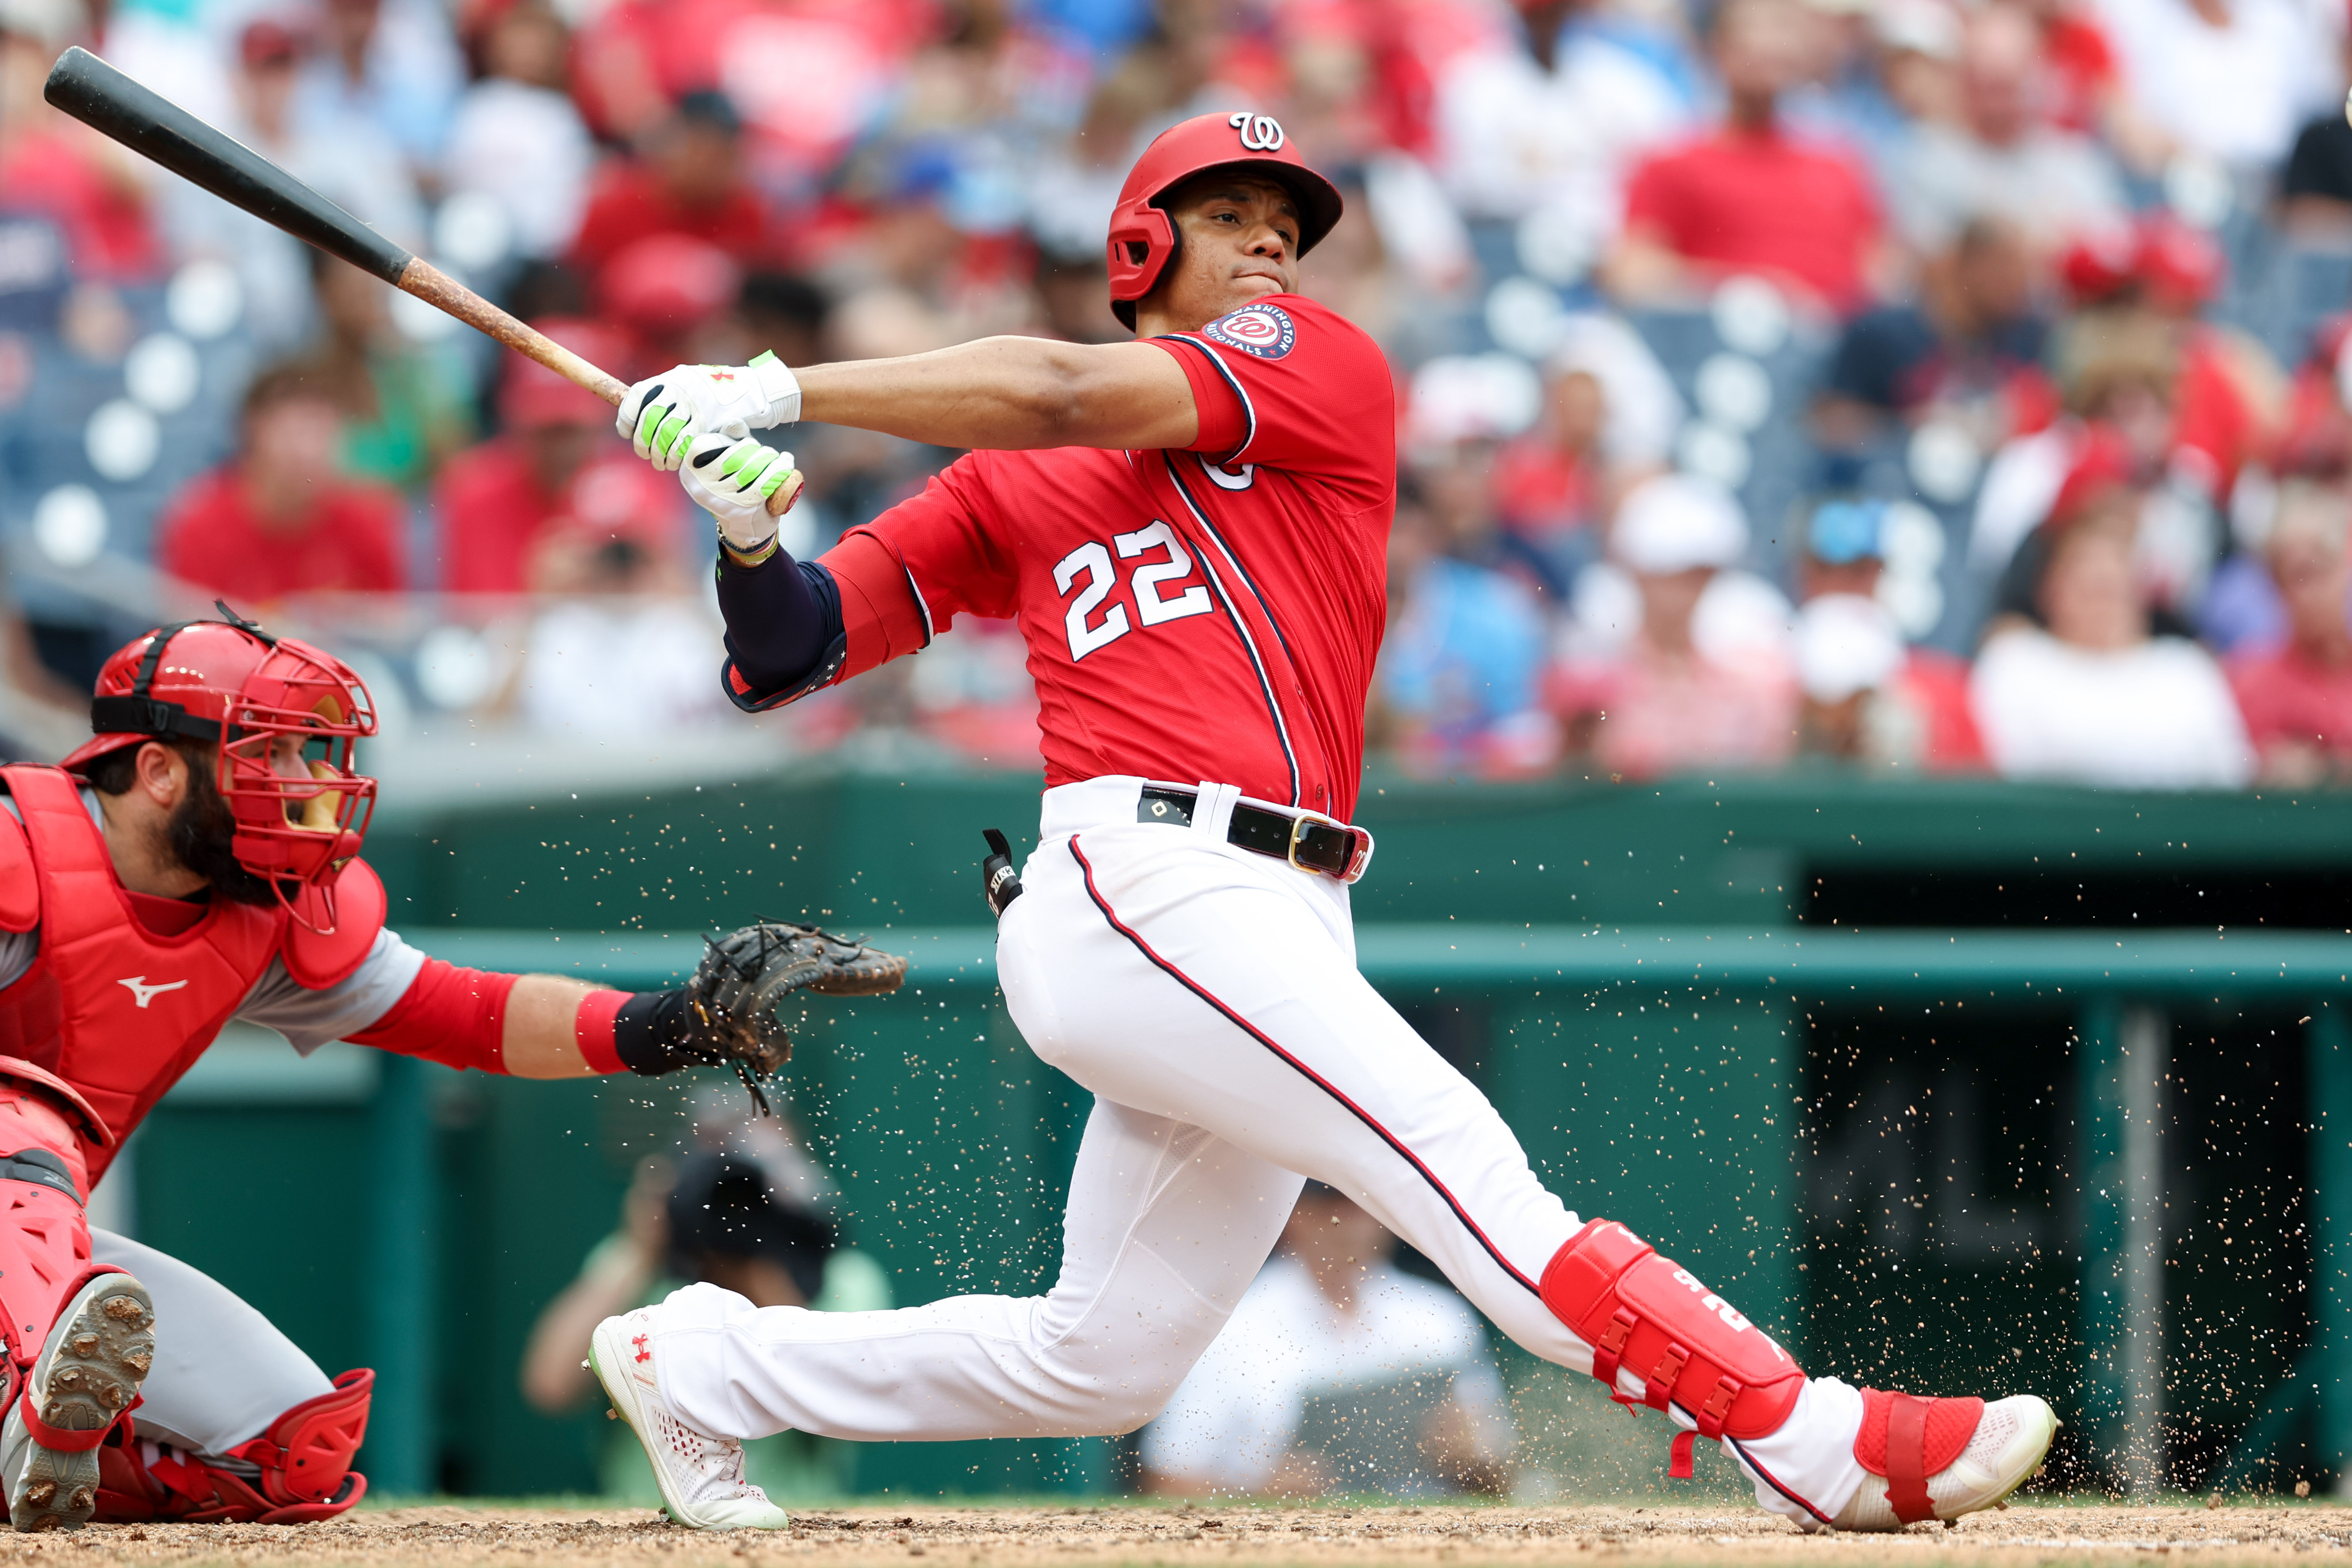 Juan Soto (#22) of the Washington Nationals hits in the game against the St. Louis Cardinals at Nationals Park in Washington, D.C., July 31, 2022. /CFP